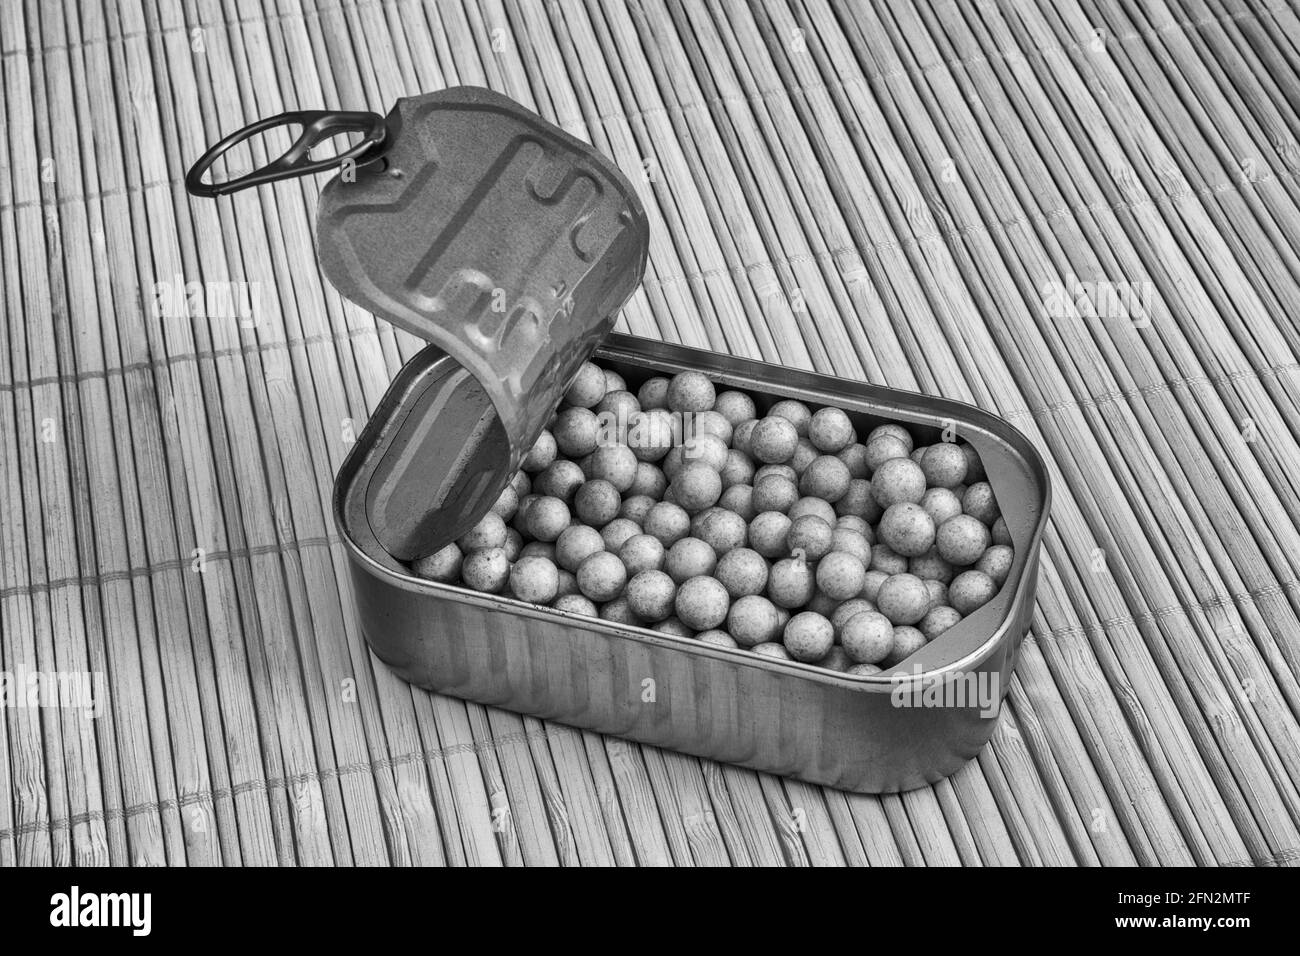 Black and white of fish can with small styrene spheres. For packed in like sardines, no room to move, tight fit, squashed together, overcrowded. Stock Photo